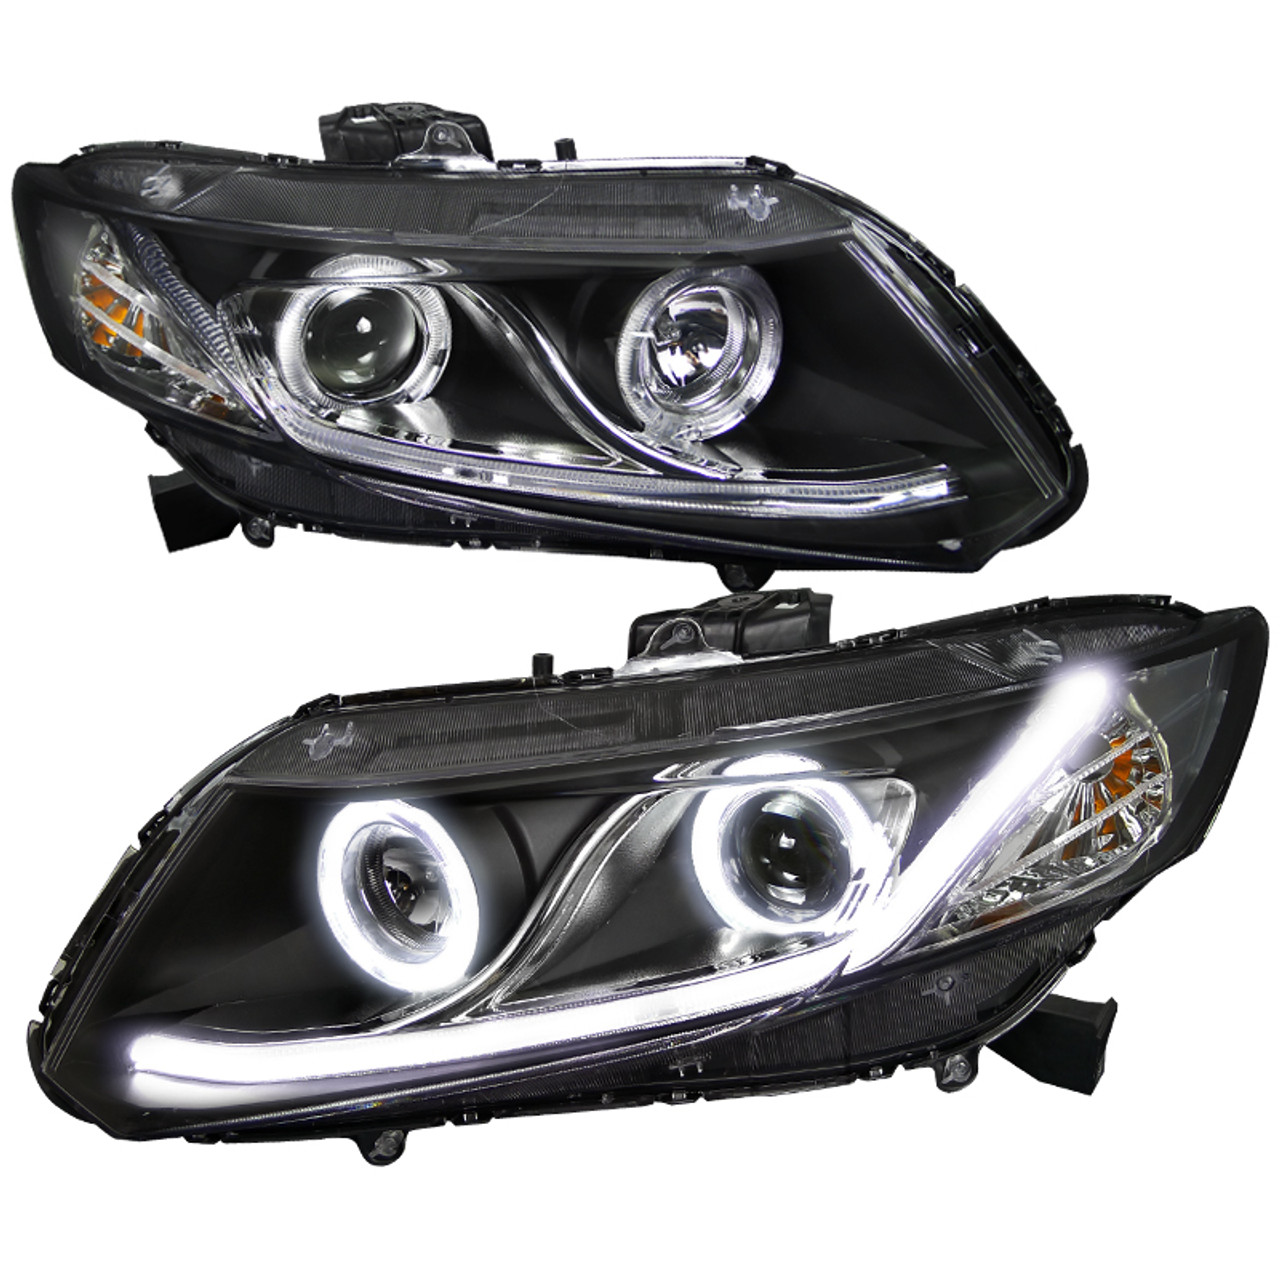  Spec-D Tuning Projector Headlights W/LED Light Bar Glossy Black  Housing Smoke Lens Compatible with 2012-2013 Honda Civic Coupe, 2012-2015  Honda Civic Sedan Left + Right Pair Headlamps Assembly : Automotive